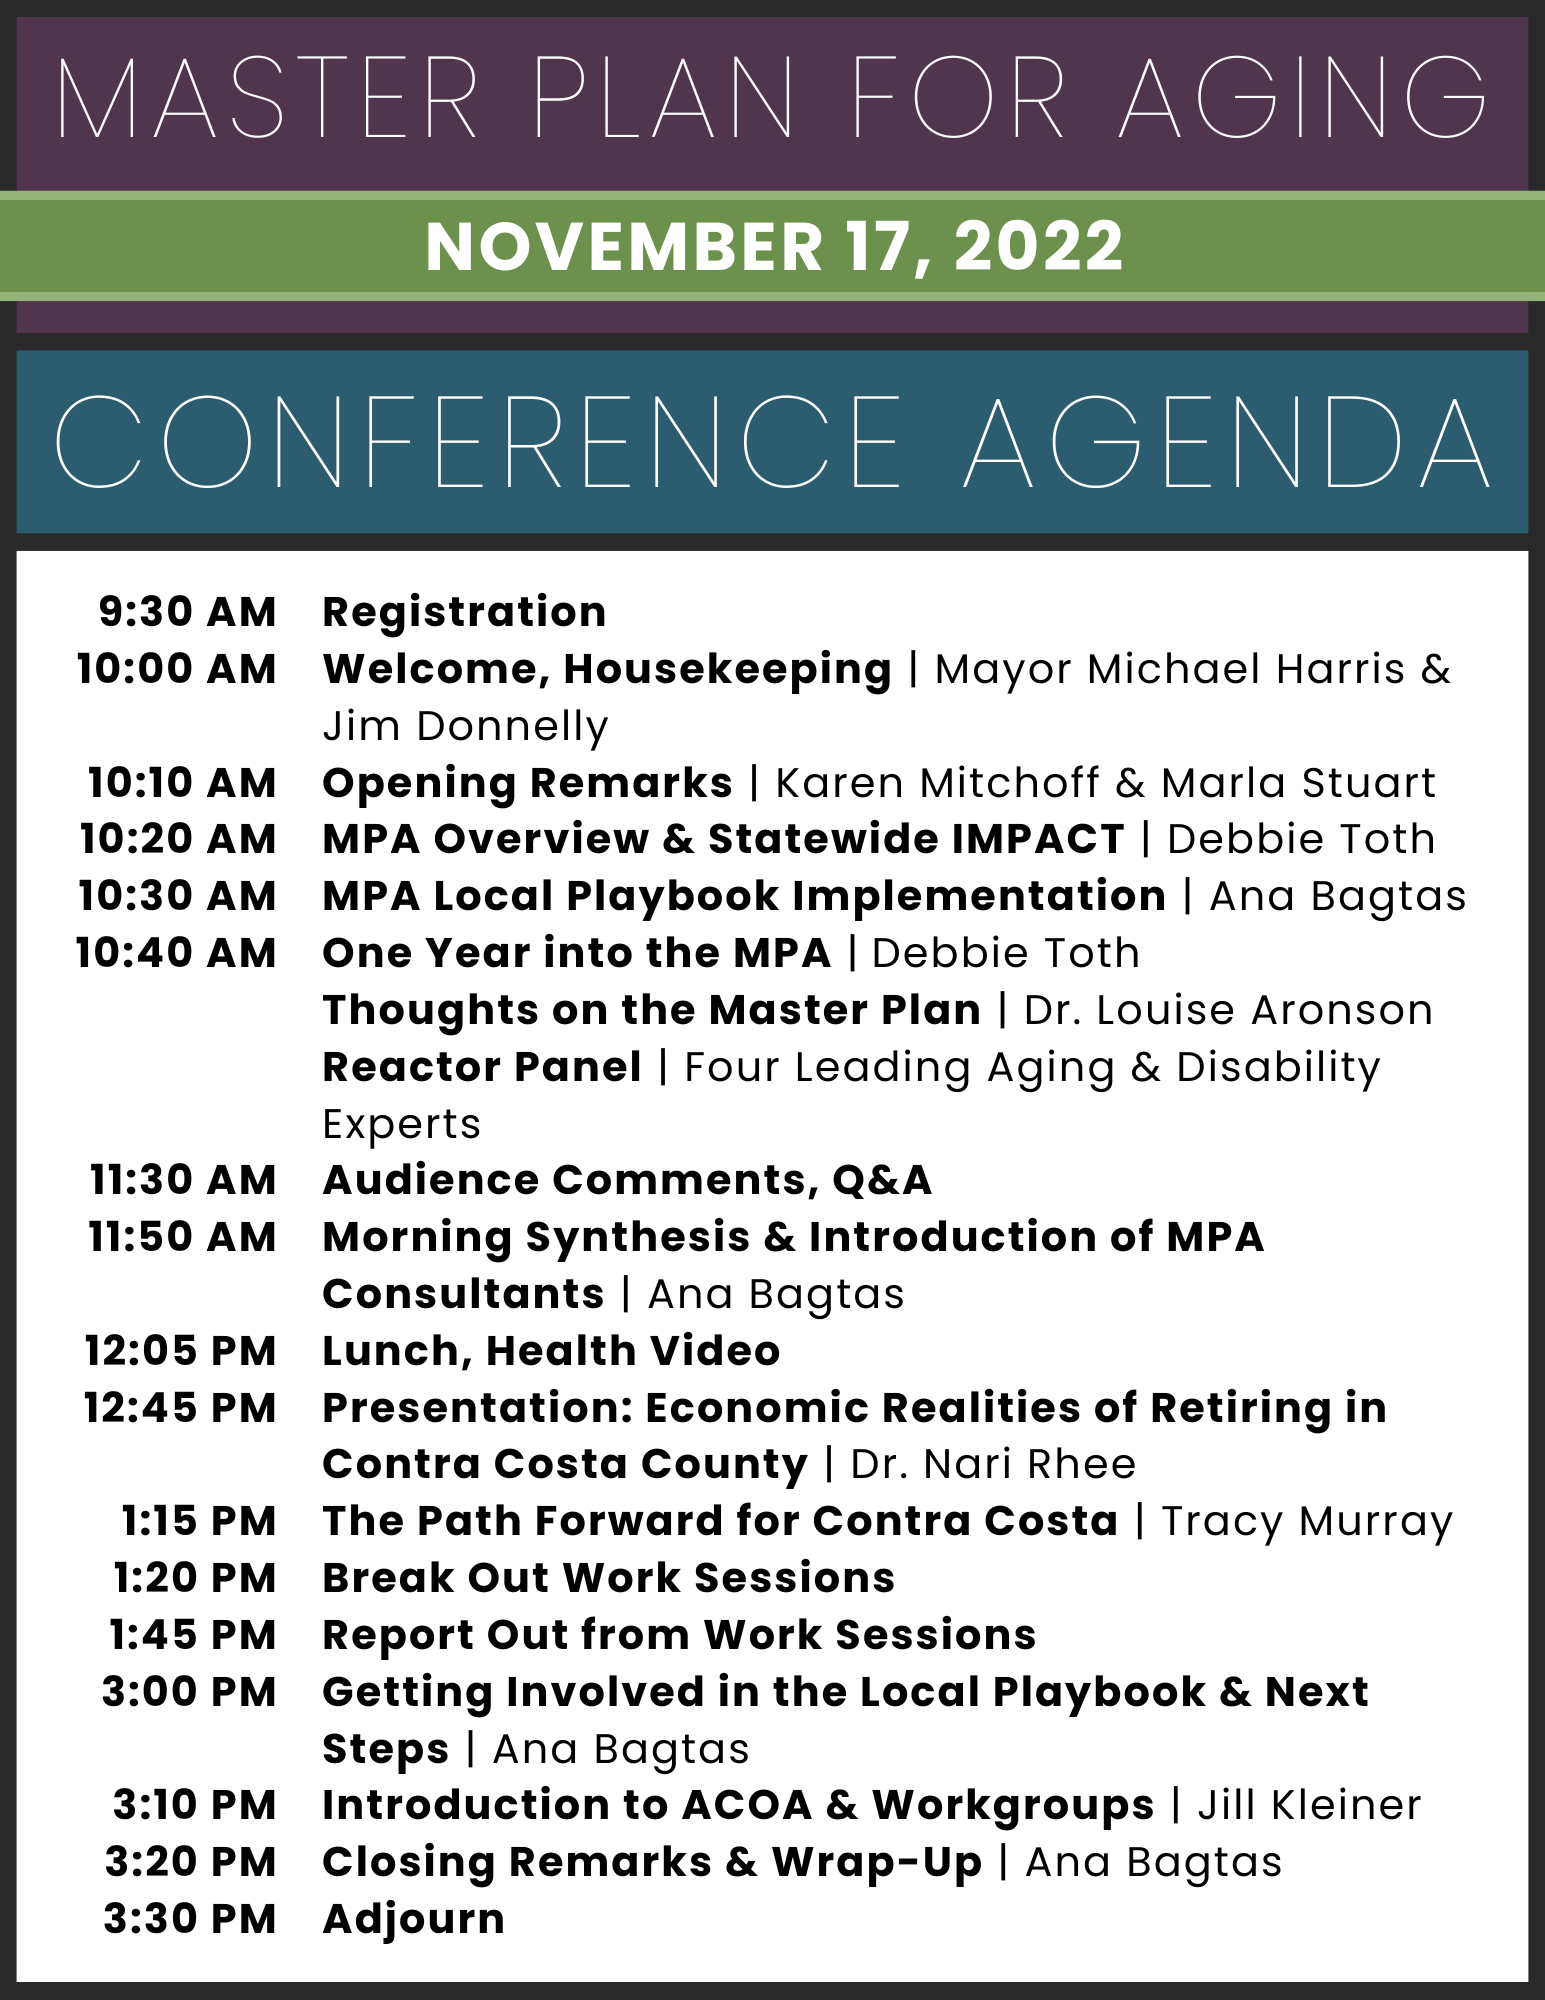 Image of the Master Plan for Aging Conference Agenda on November 17, 2022.